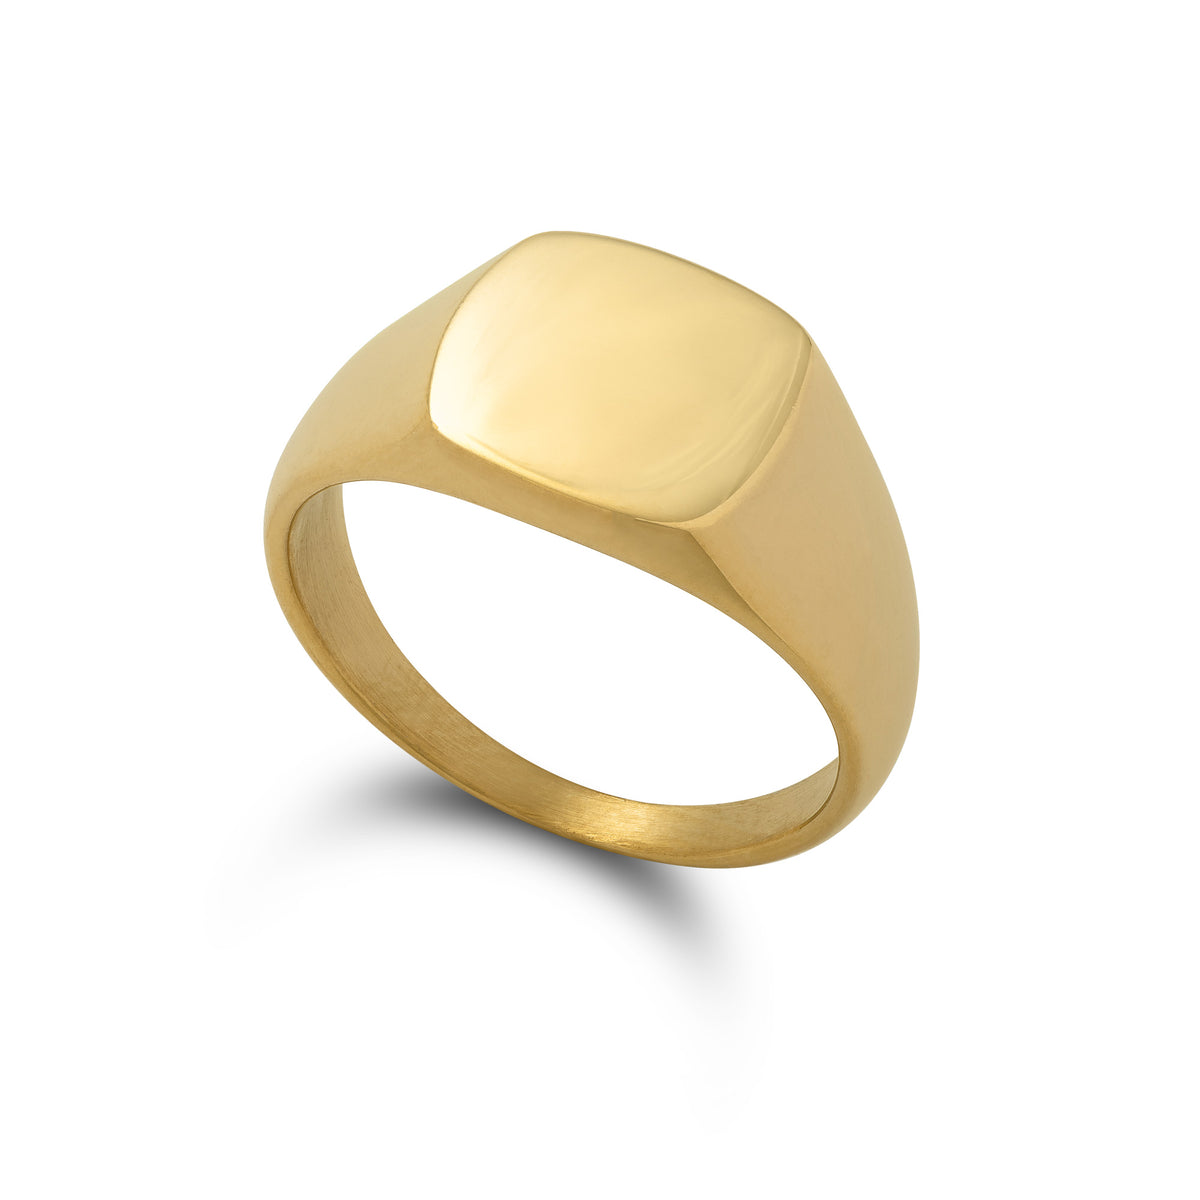 Minimal Signet Ring in gold on white background